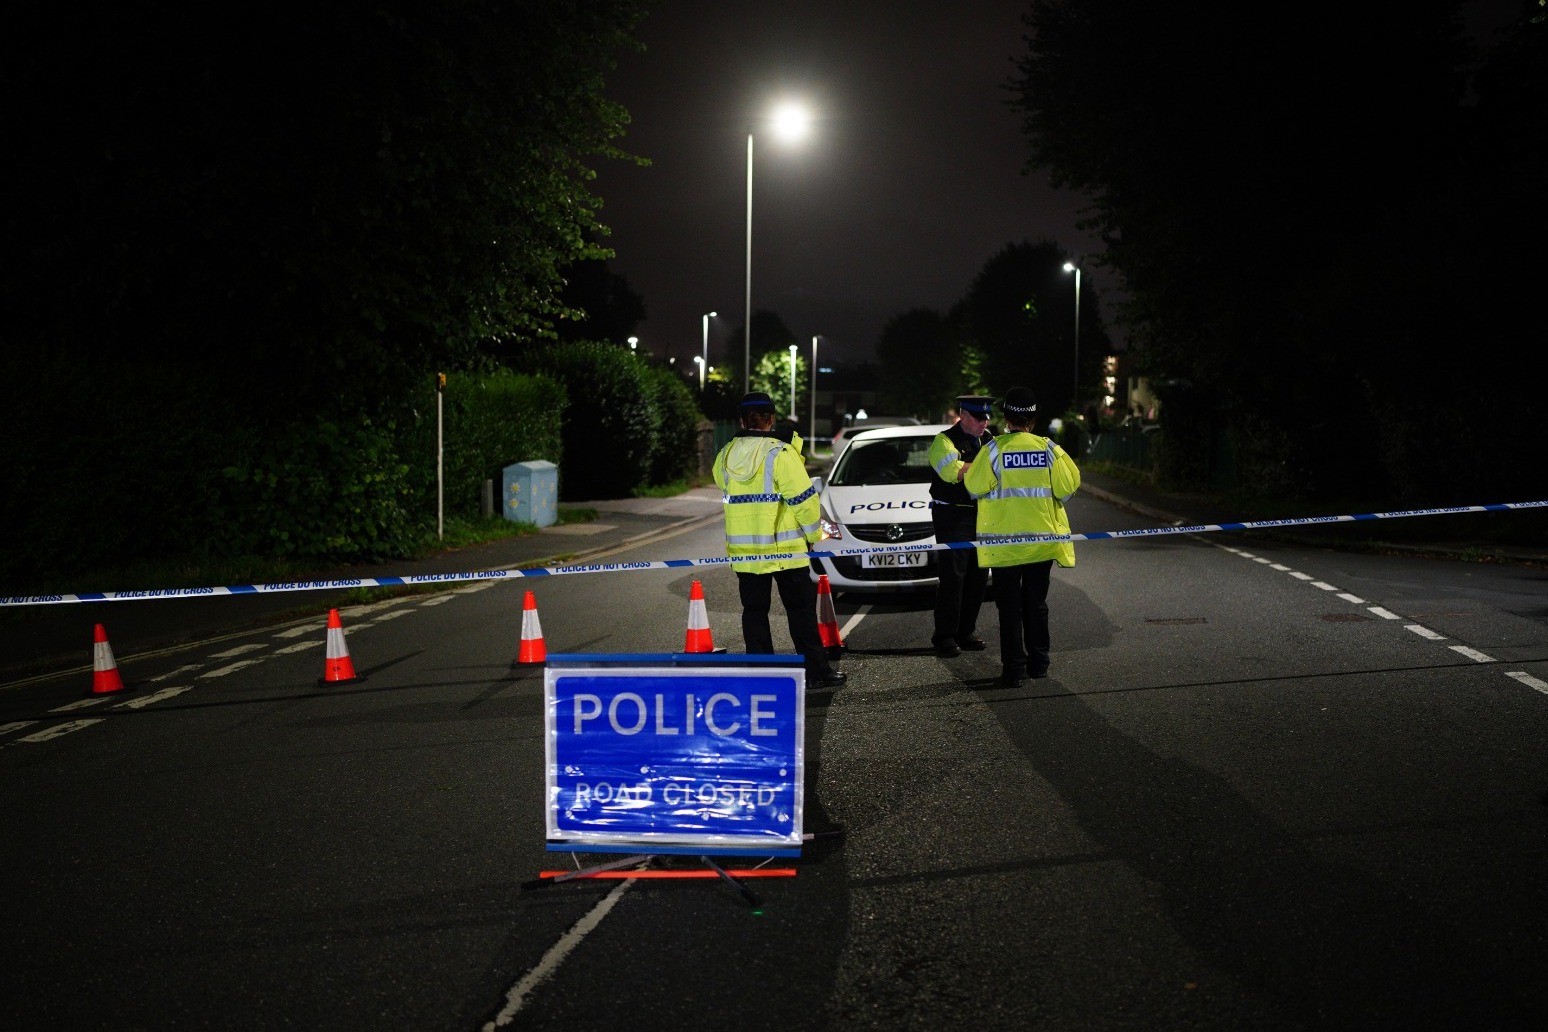 Six dead in Plymouth shooting including suspect - Banbury FM